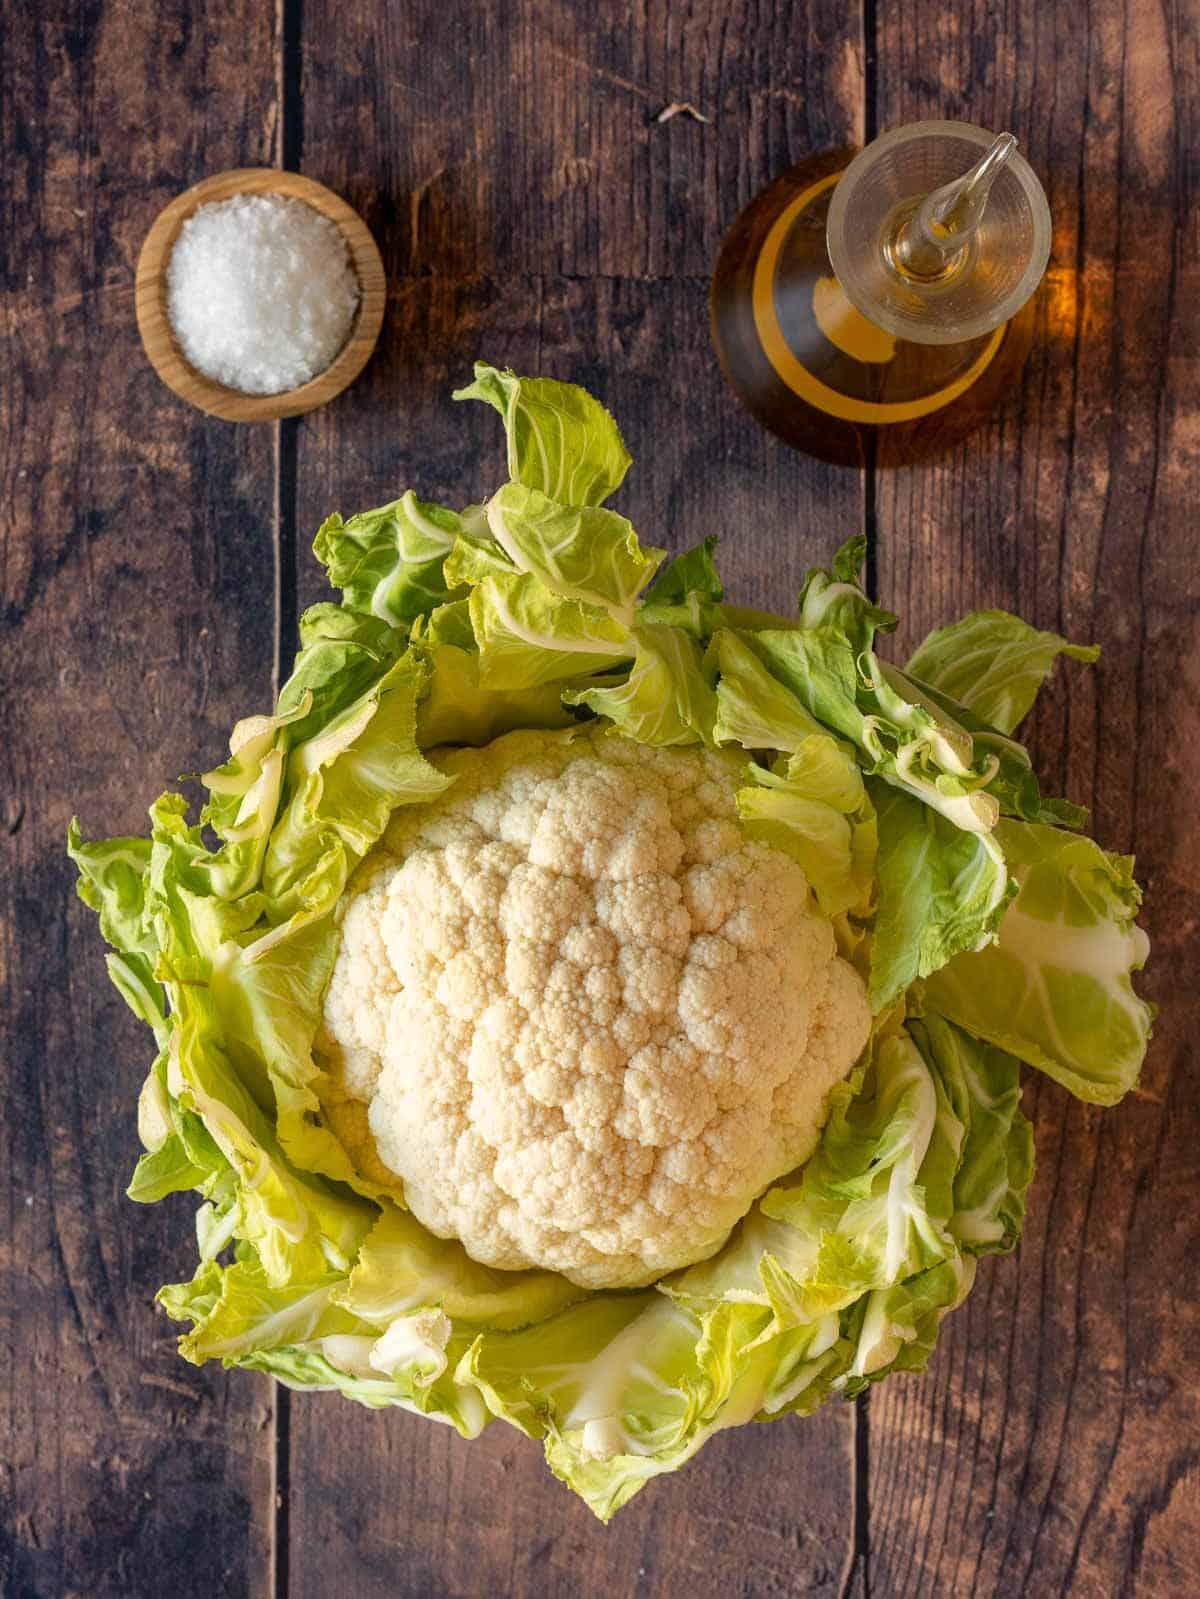 perfectly roasted whole cauliflower head ingredients.